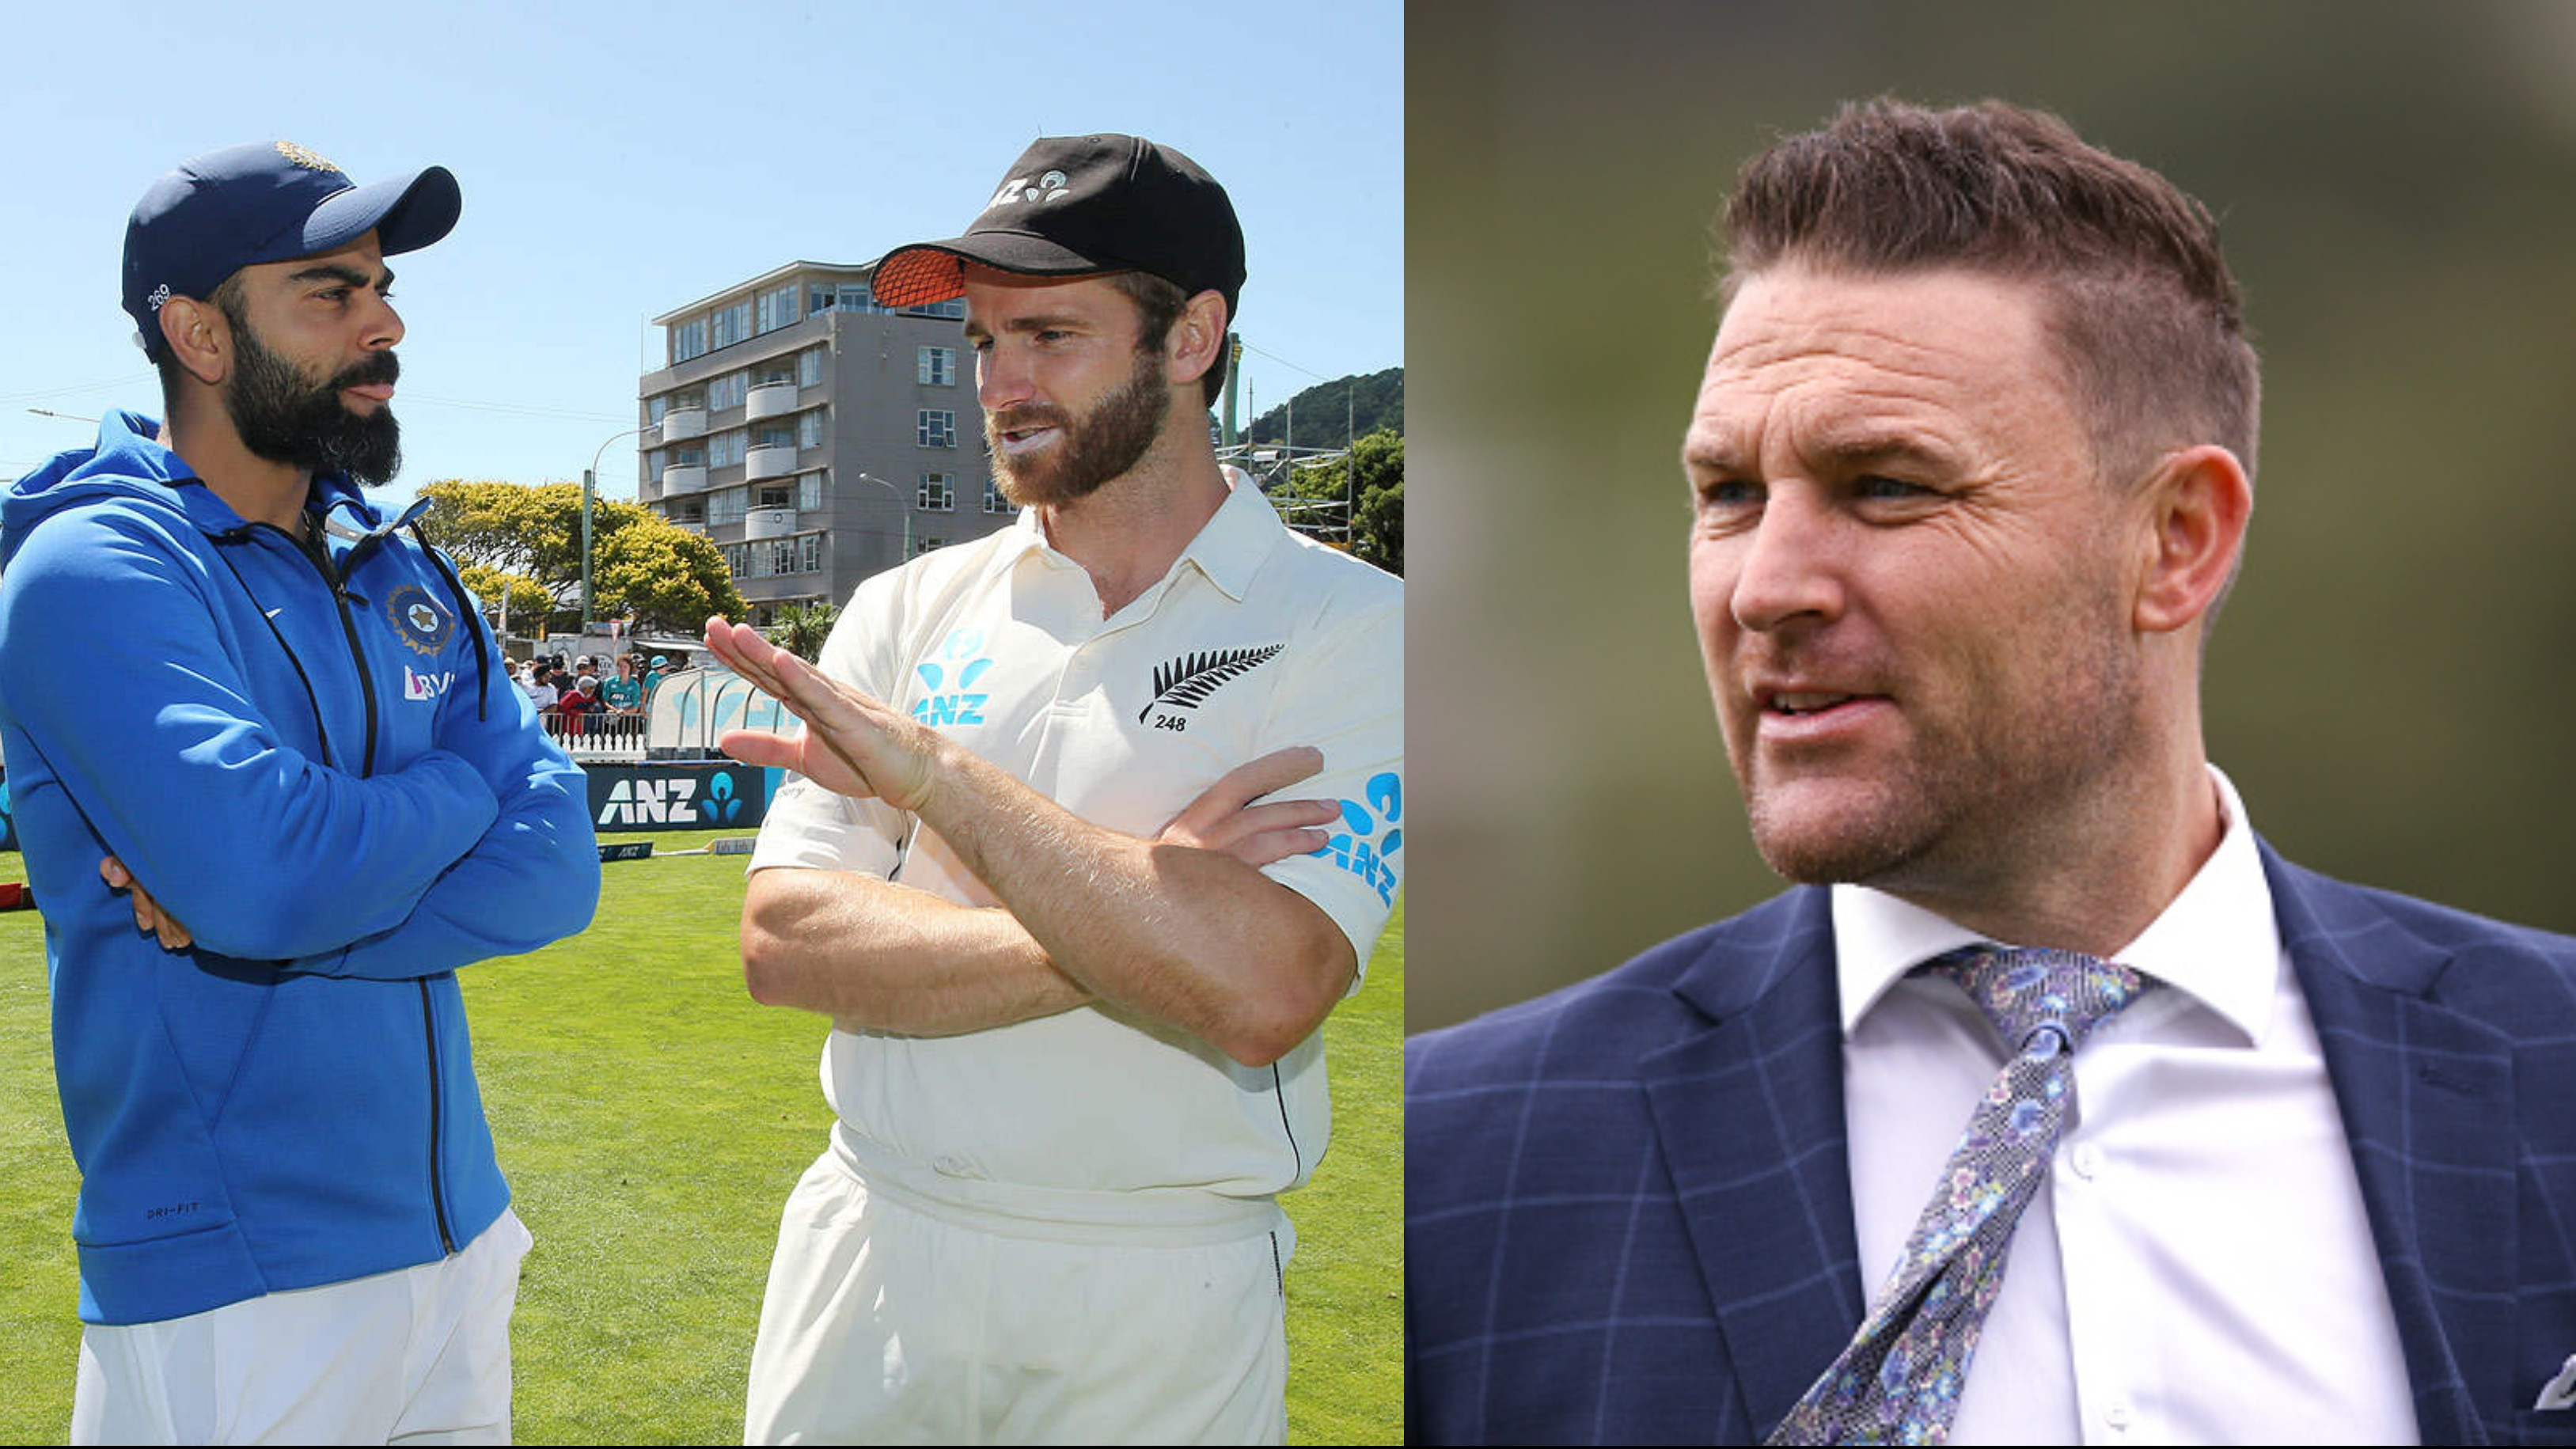 Kohli and Williamson both have led their teams brilliantly during WTC, says McCullum